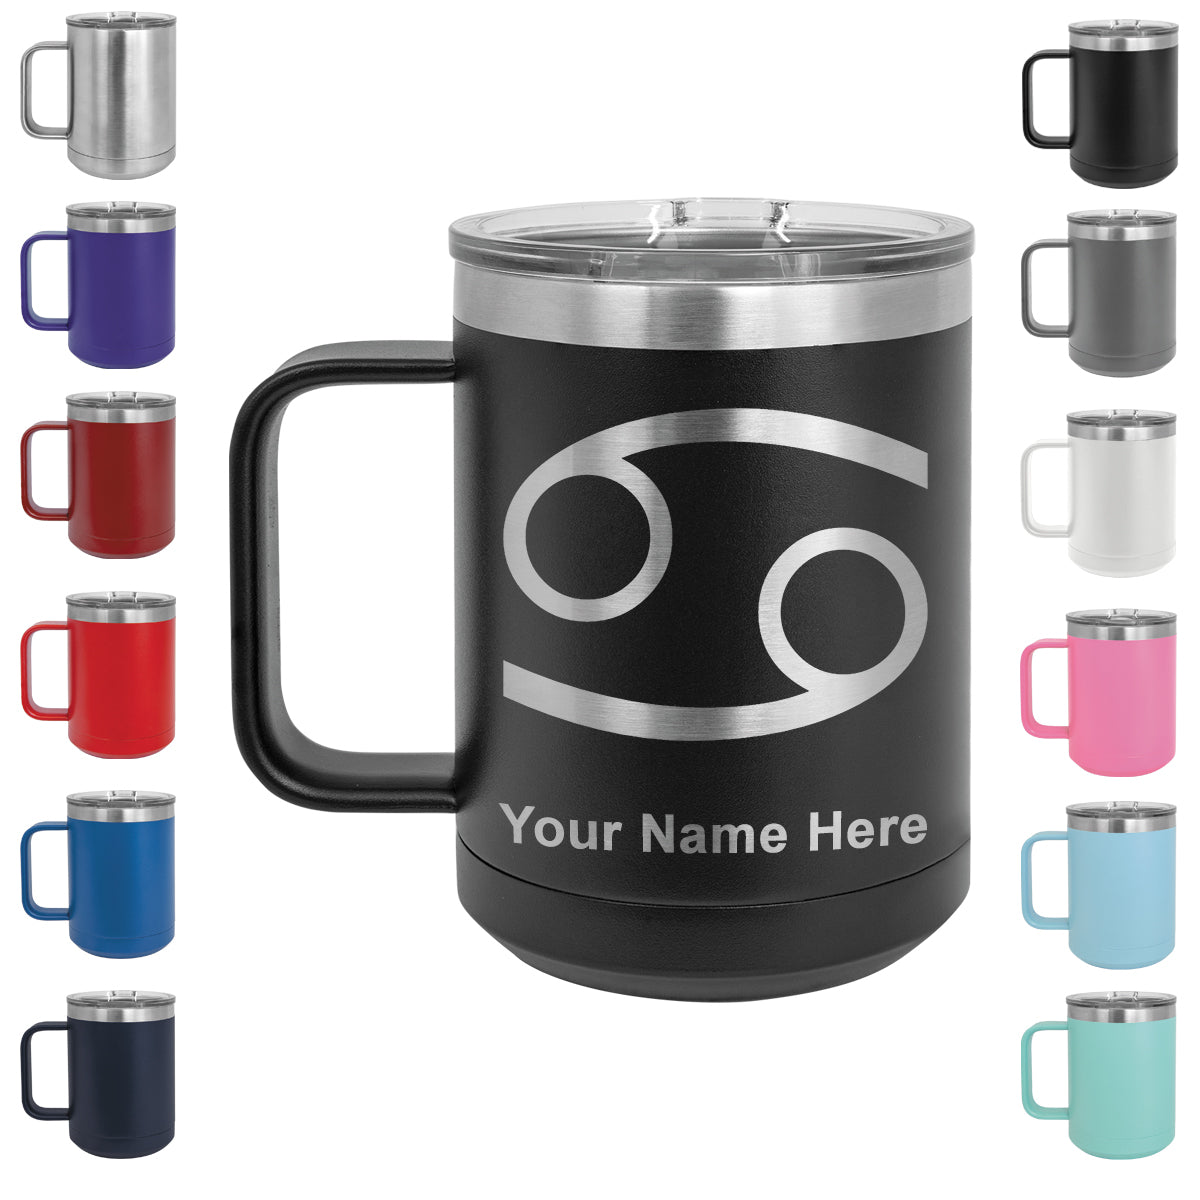 15oz Vacuum Insulated Coffee Mug, Zodiac Sign Cancer, Personalized Engraving Included